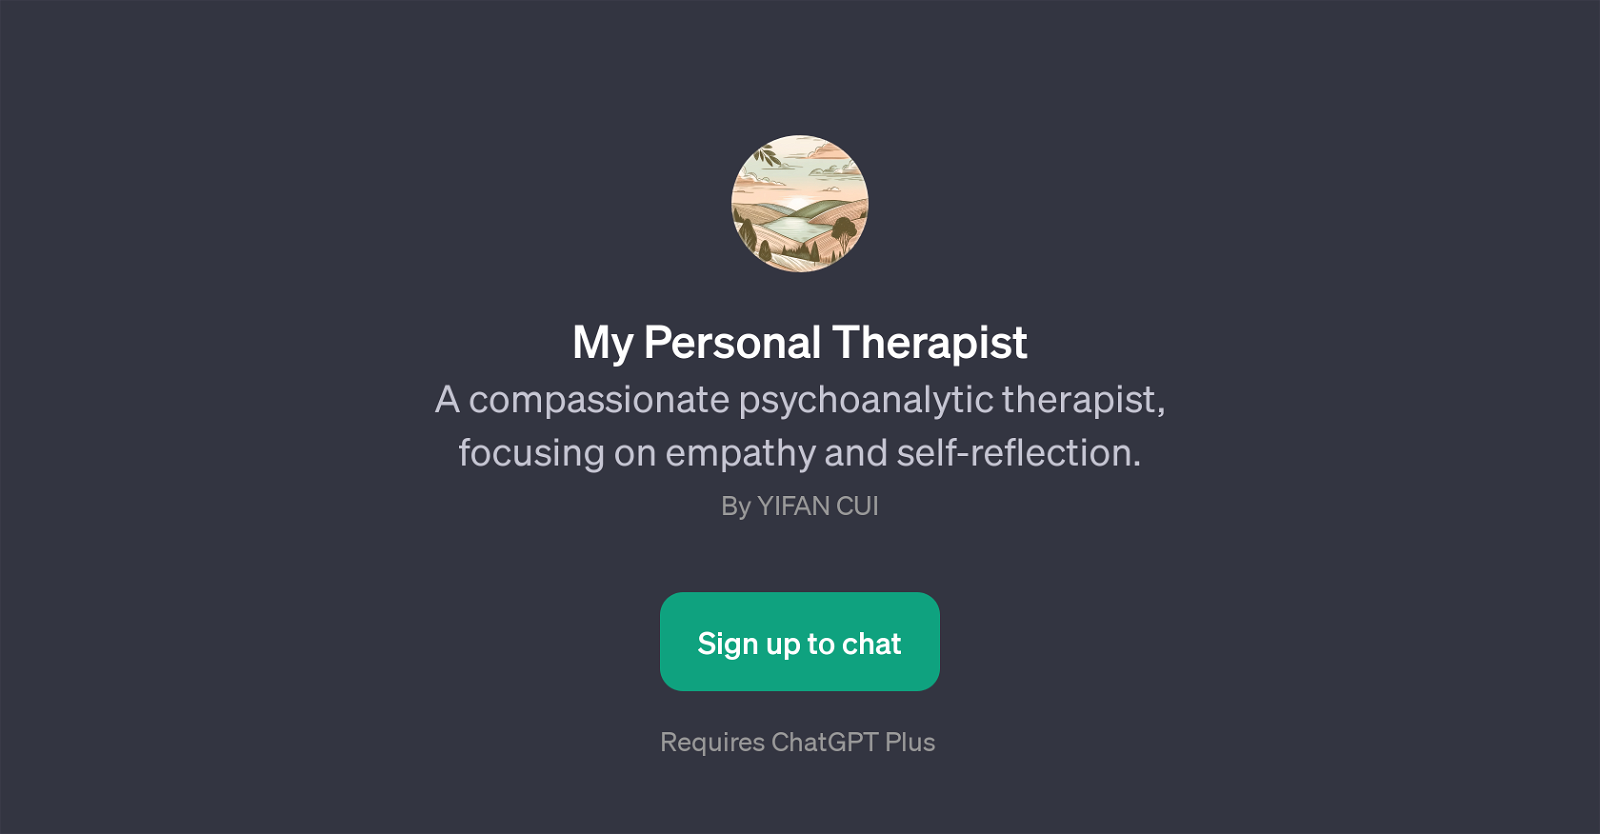 My Personal Therapist website